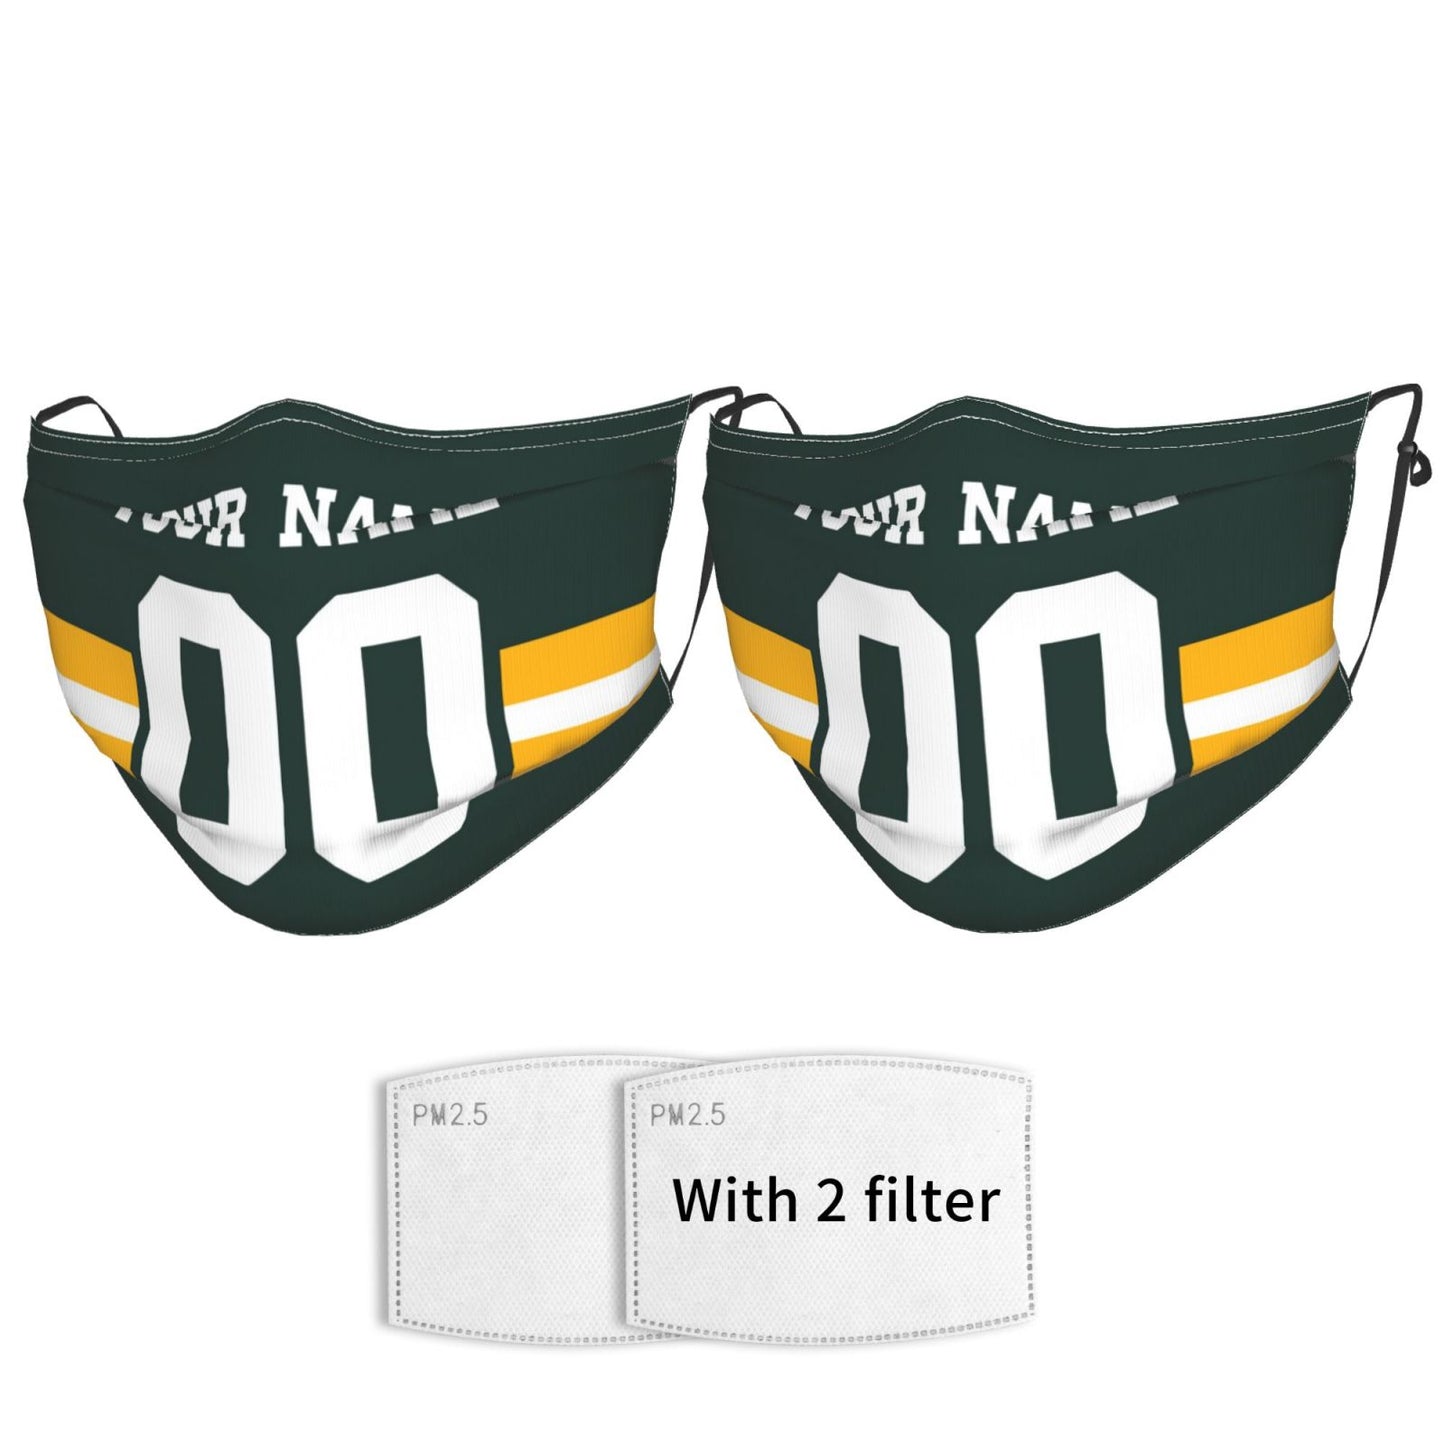 2-Pack Green Bay Packers Face Covering Football Team Decorative Adult Face Mask With Filters PM 2.5 Green